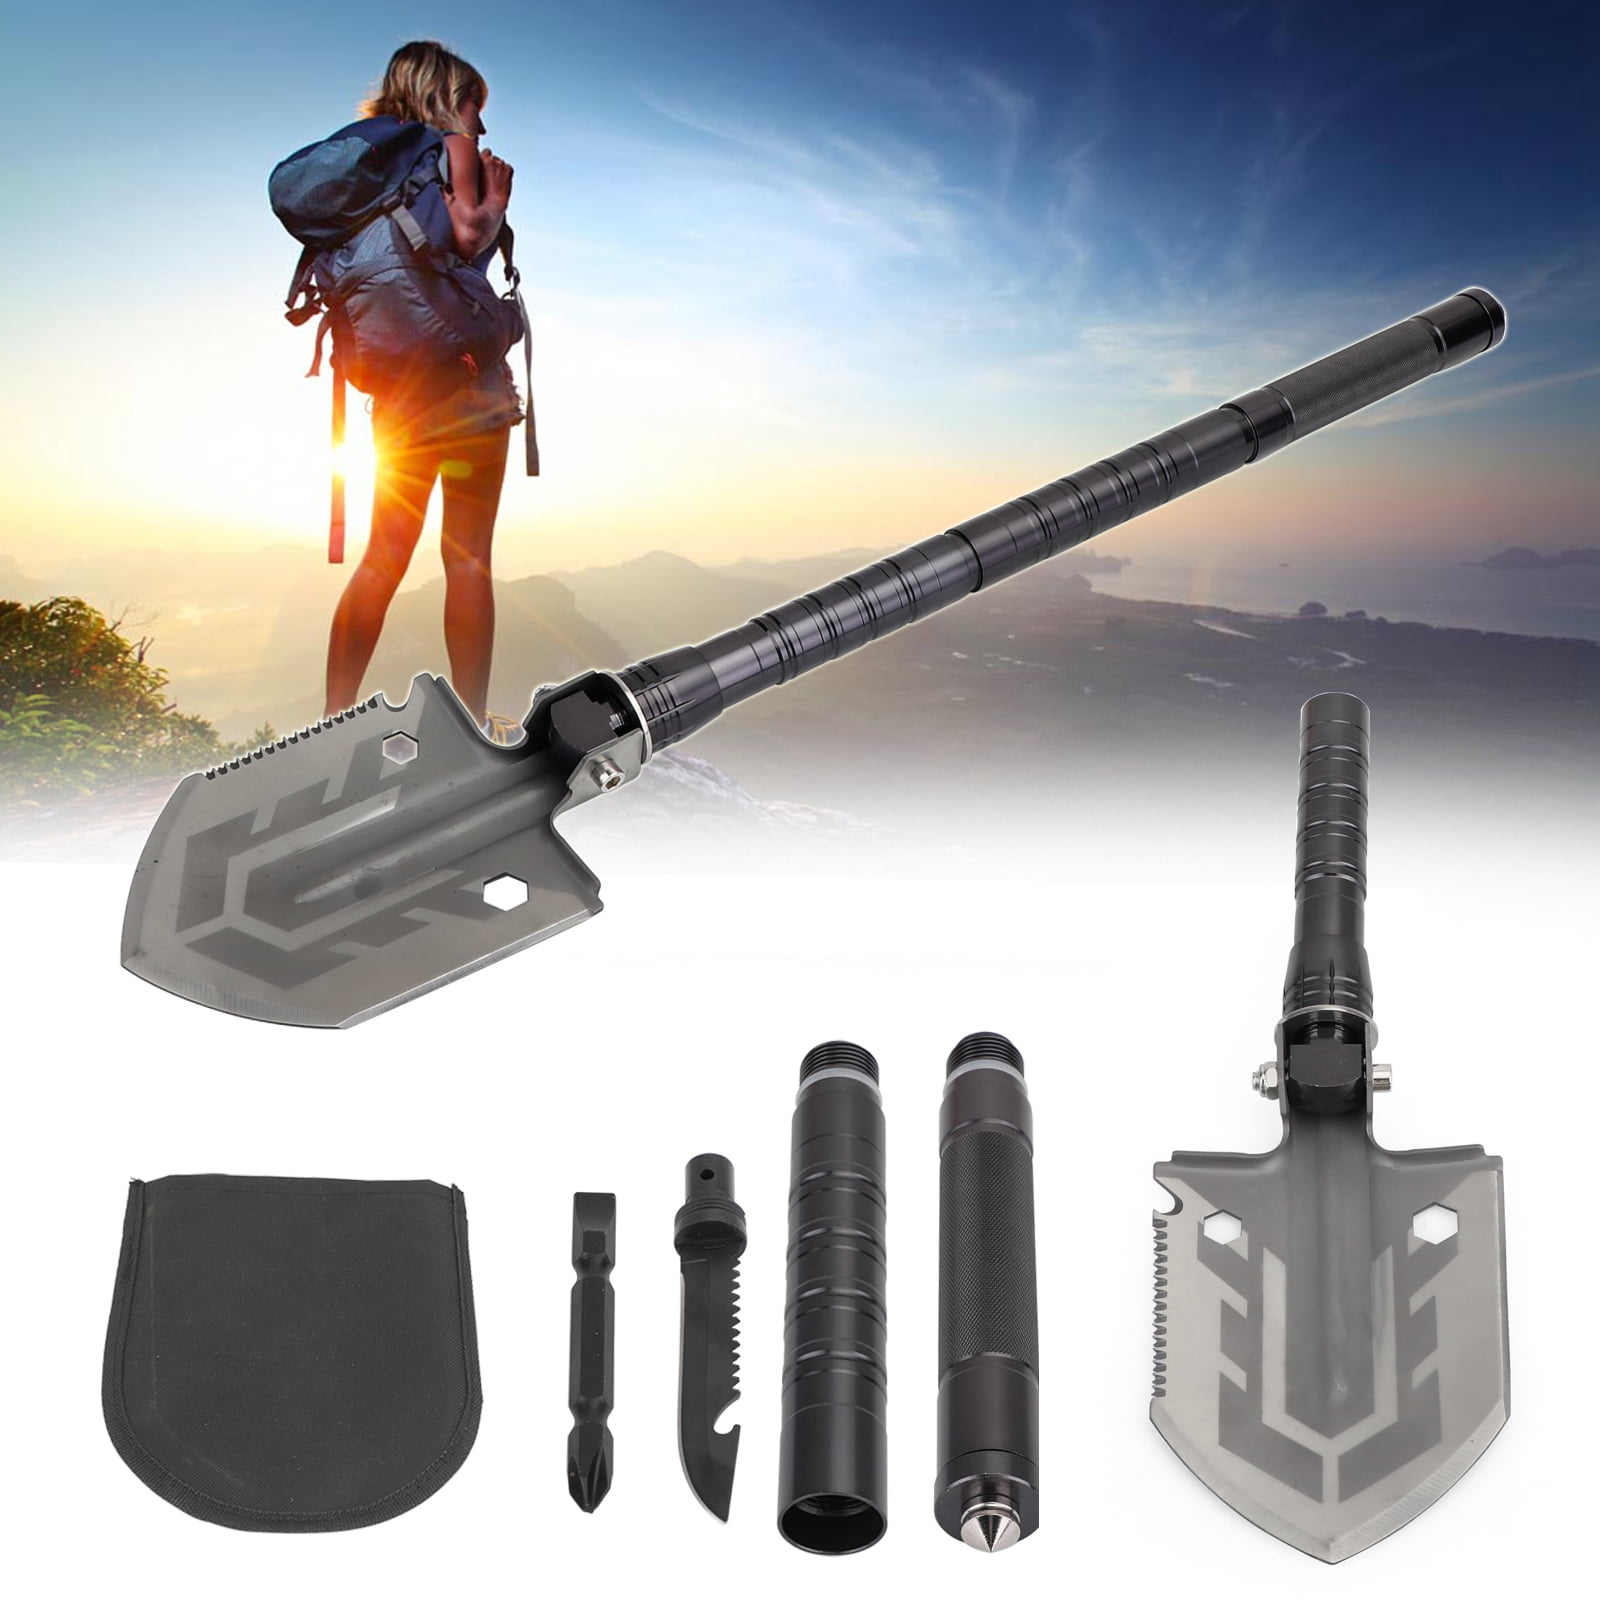 FAST FREE TO US The Ultimate Survival Tool 23-in-1 Multi-Purpose Folding Shovel 